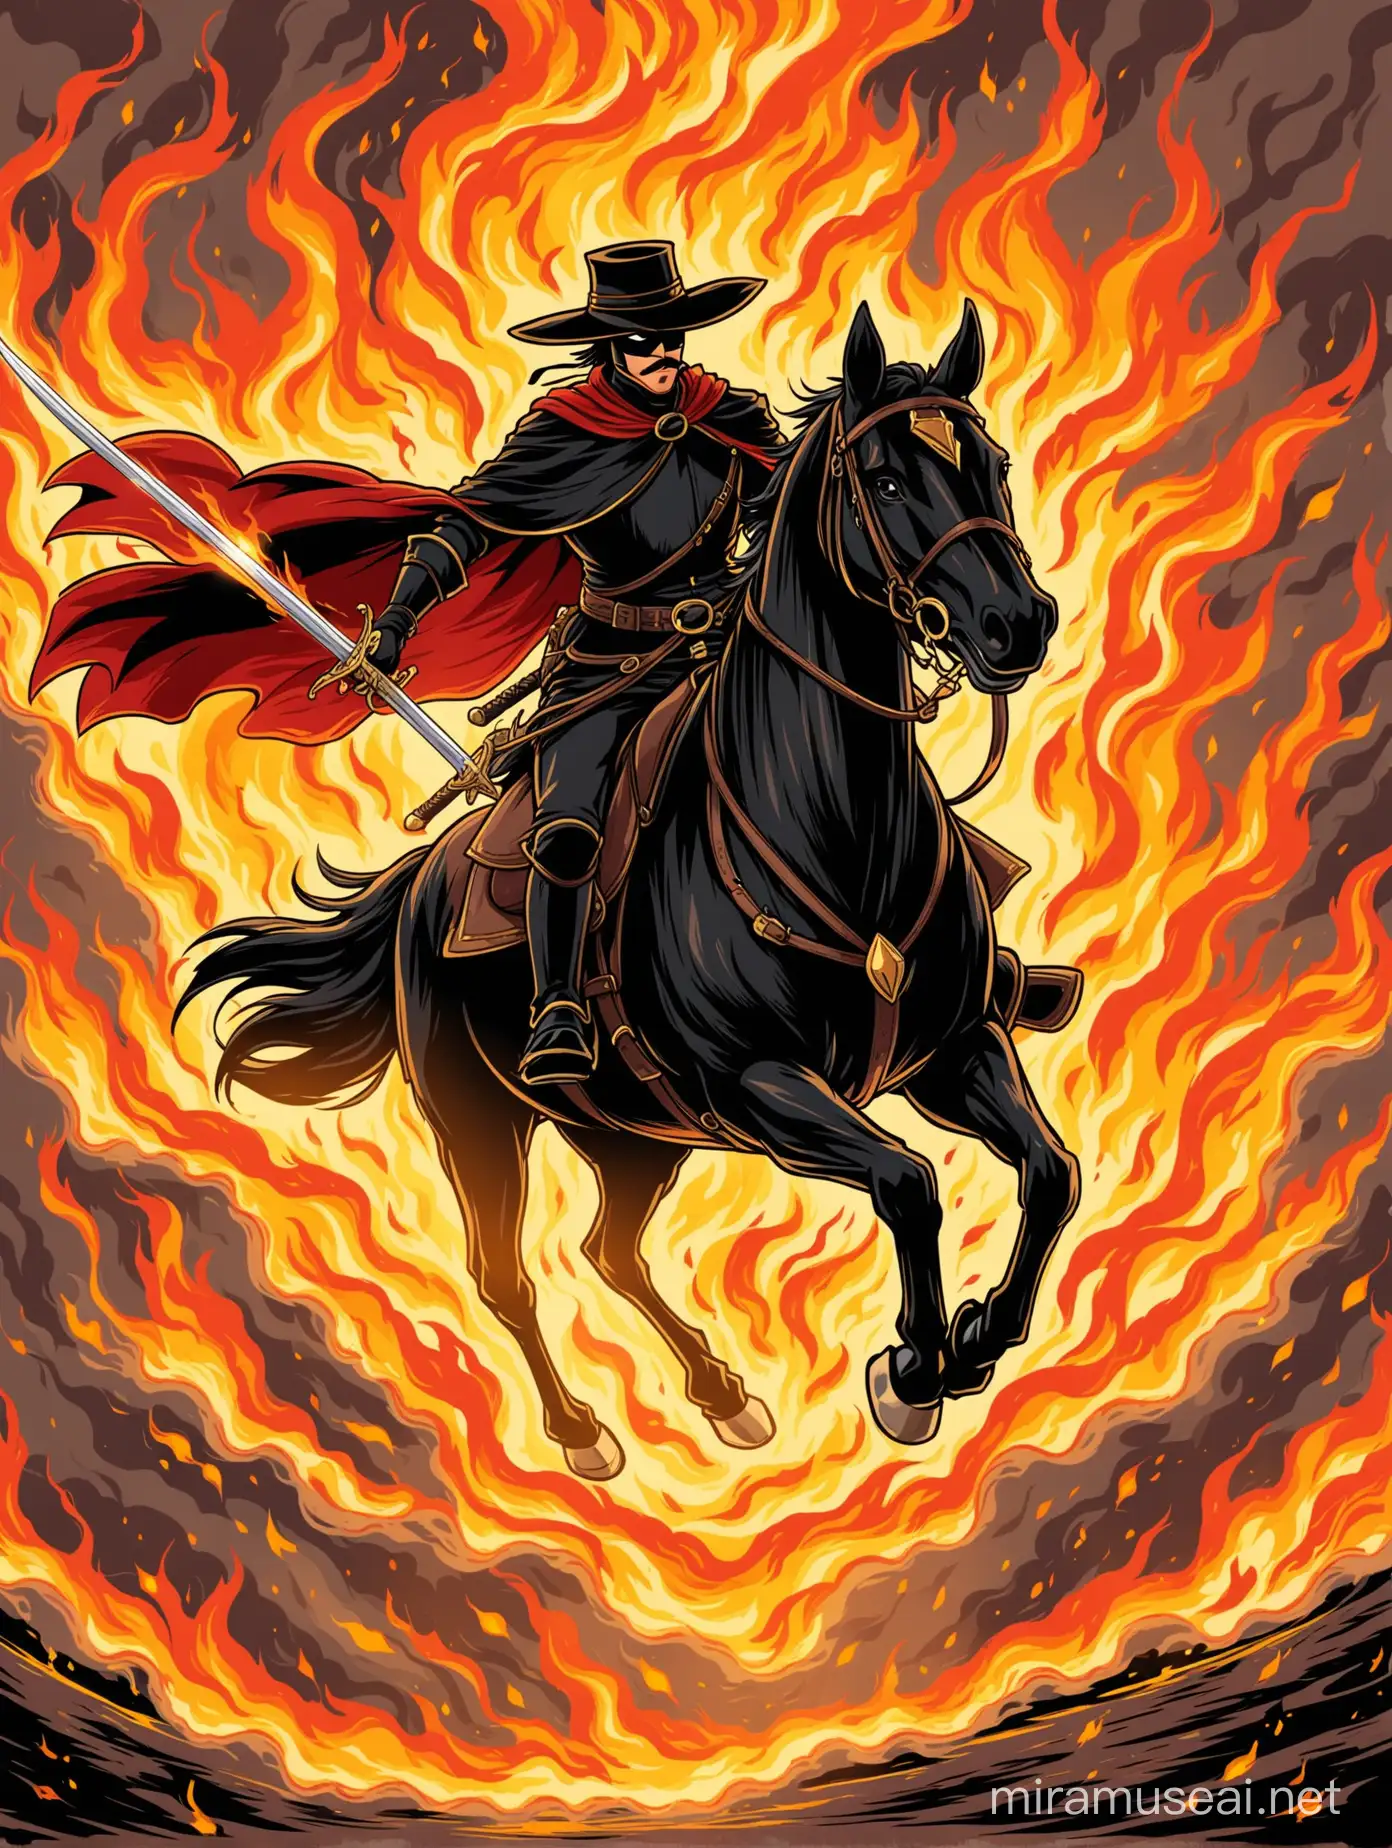 Zorro Riding Horse with Sword in Fiery Pursuit 2D Cartoon Illustration